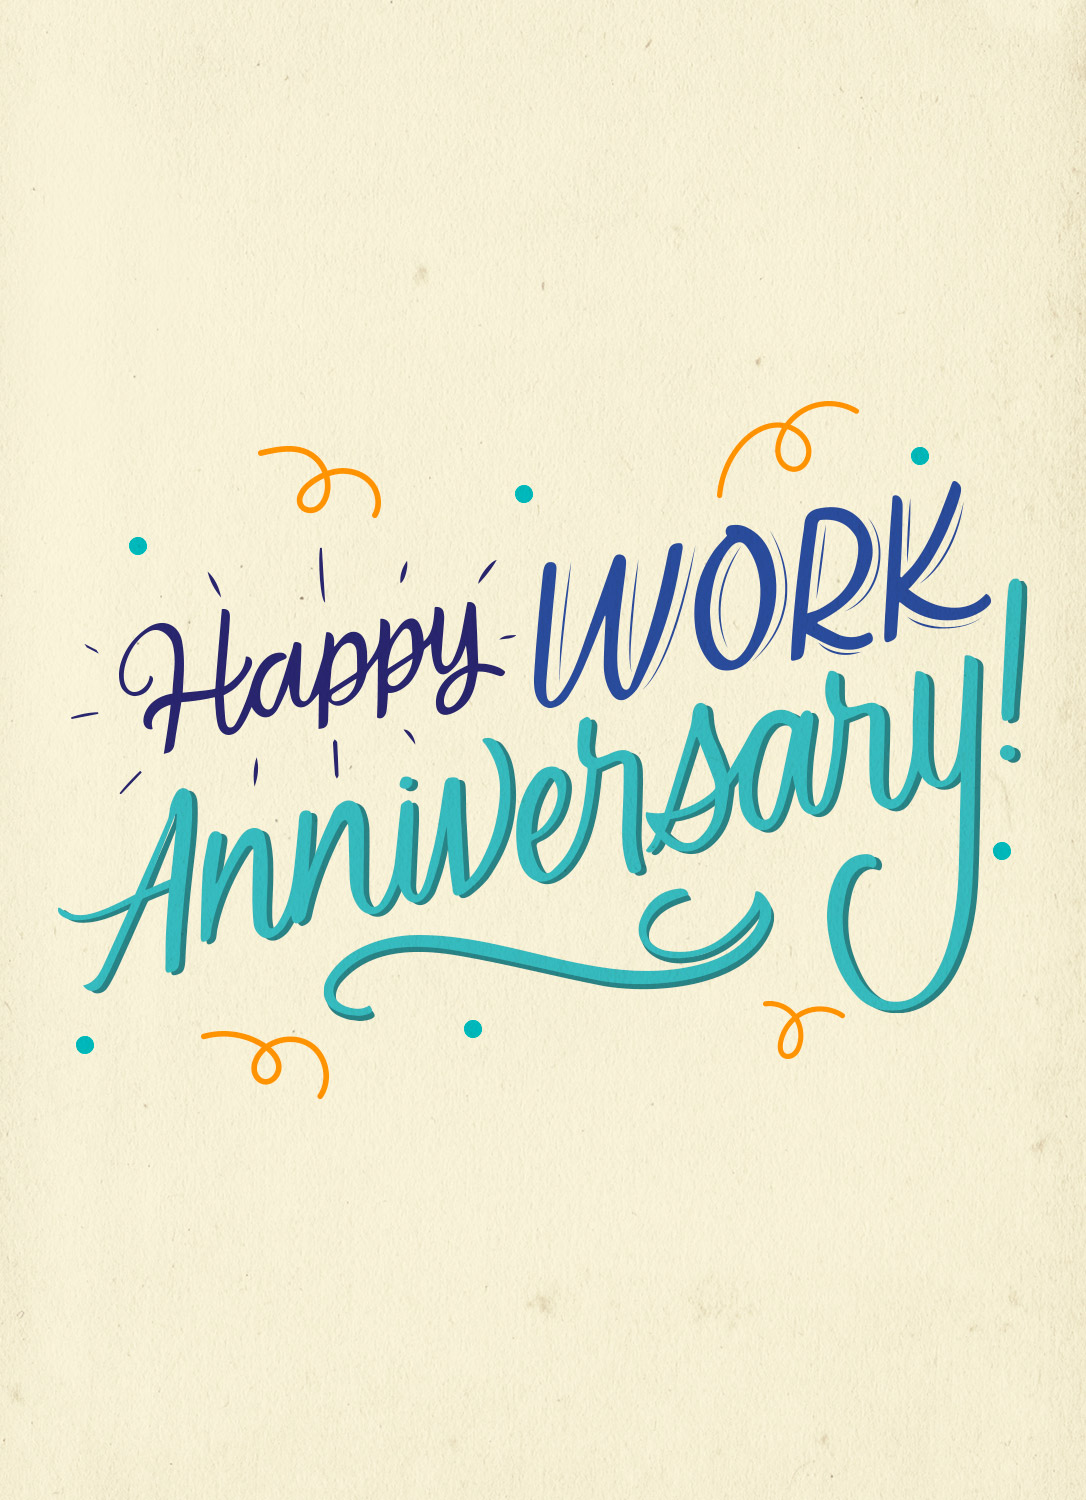 60 Happy Work Anniversary Wishes, Messages And Quotes, 41% OFF